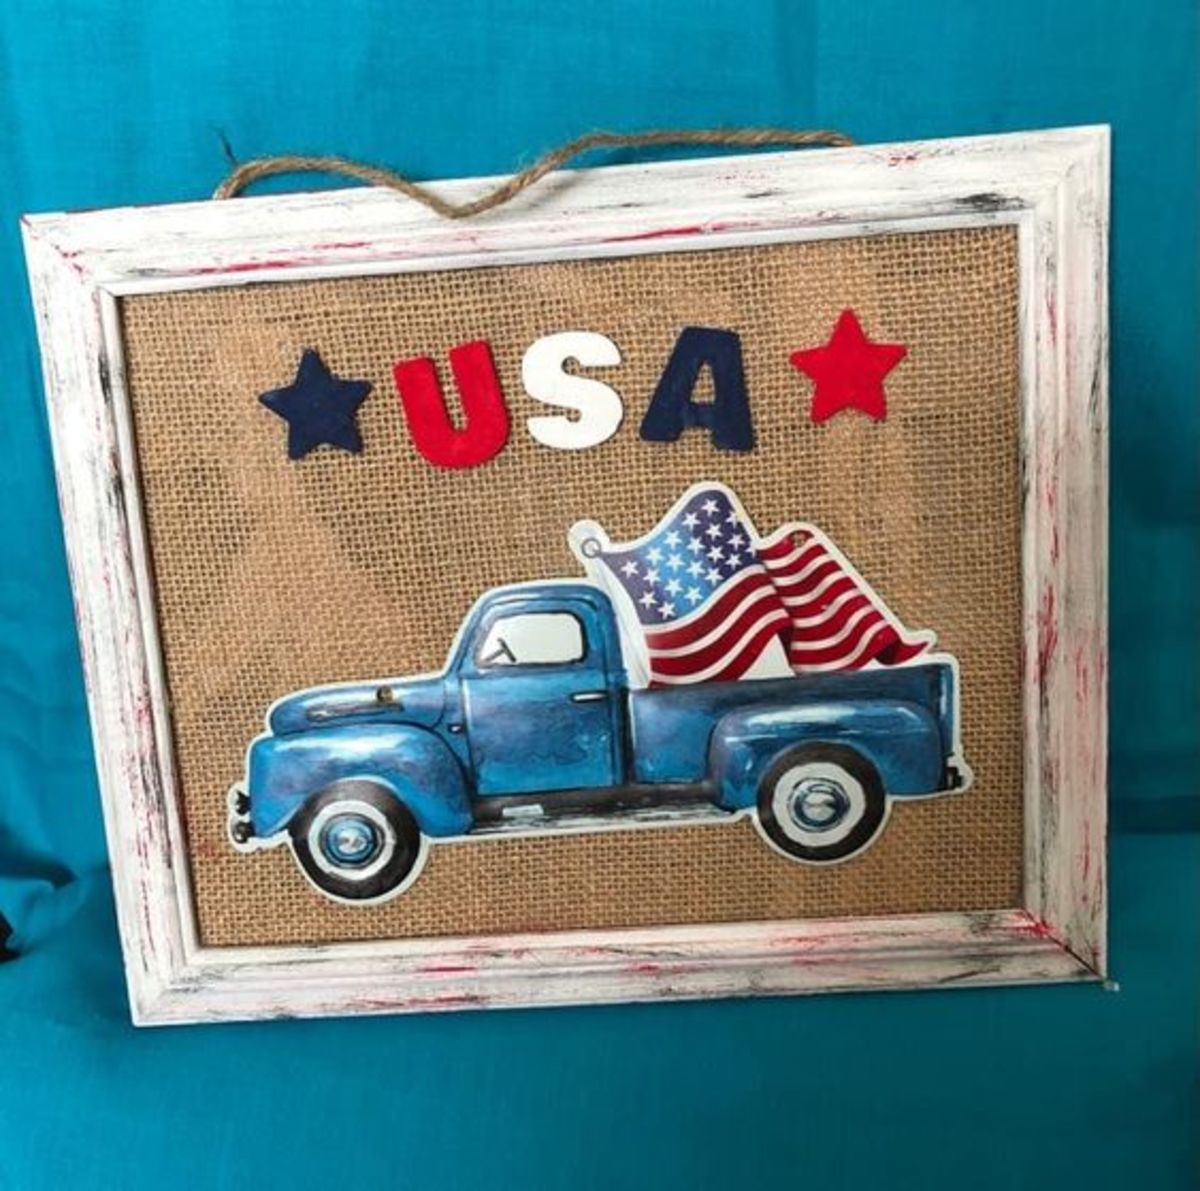 Blue truck with "USA"